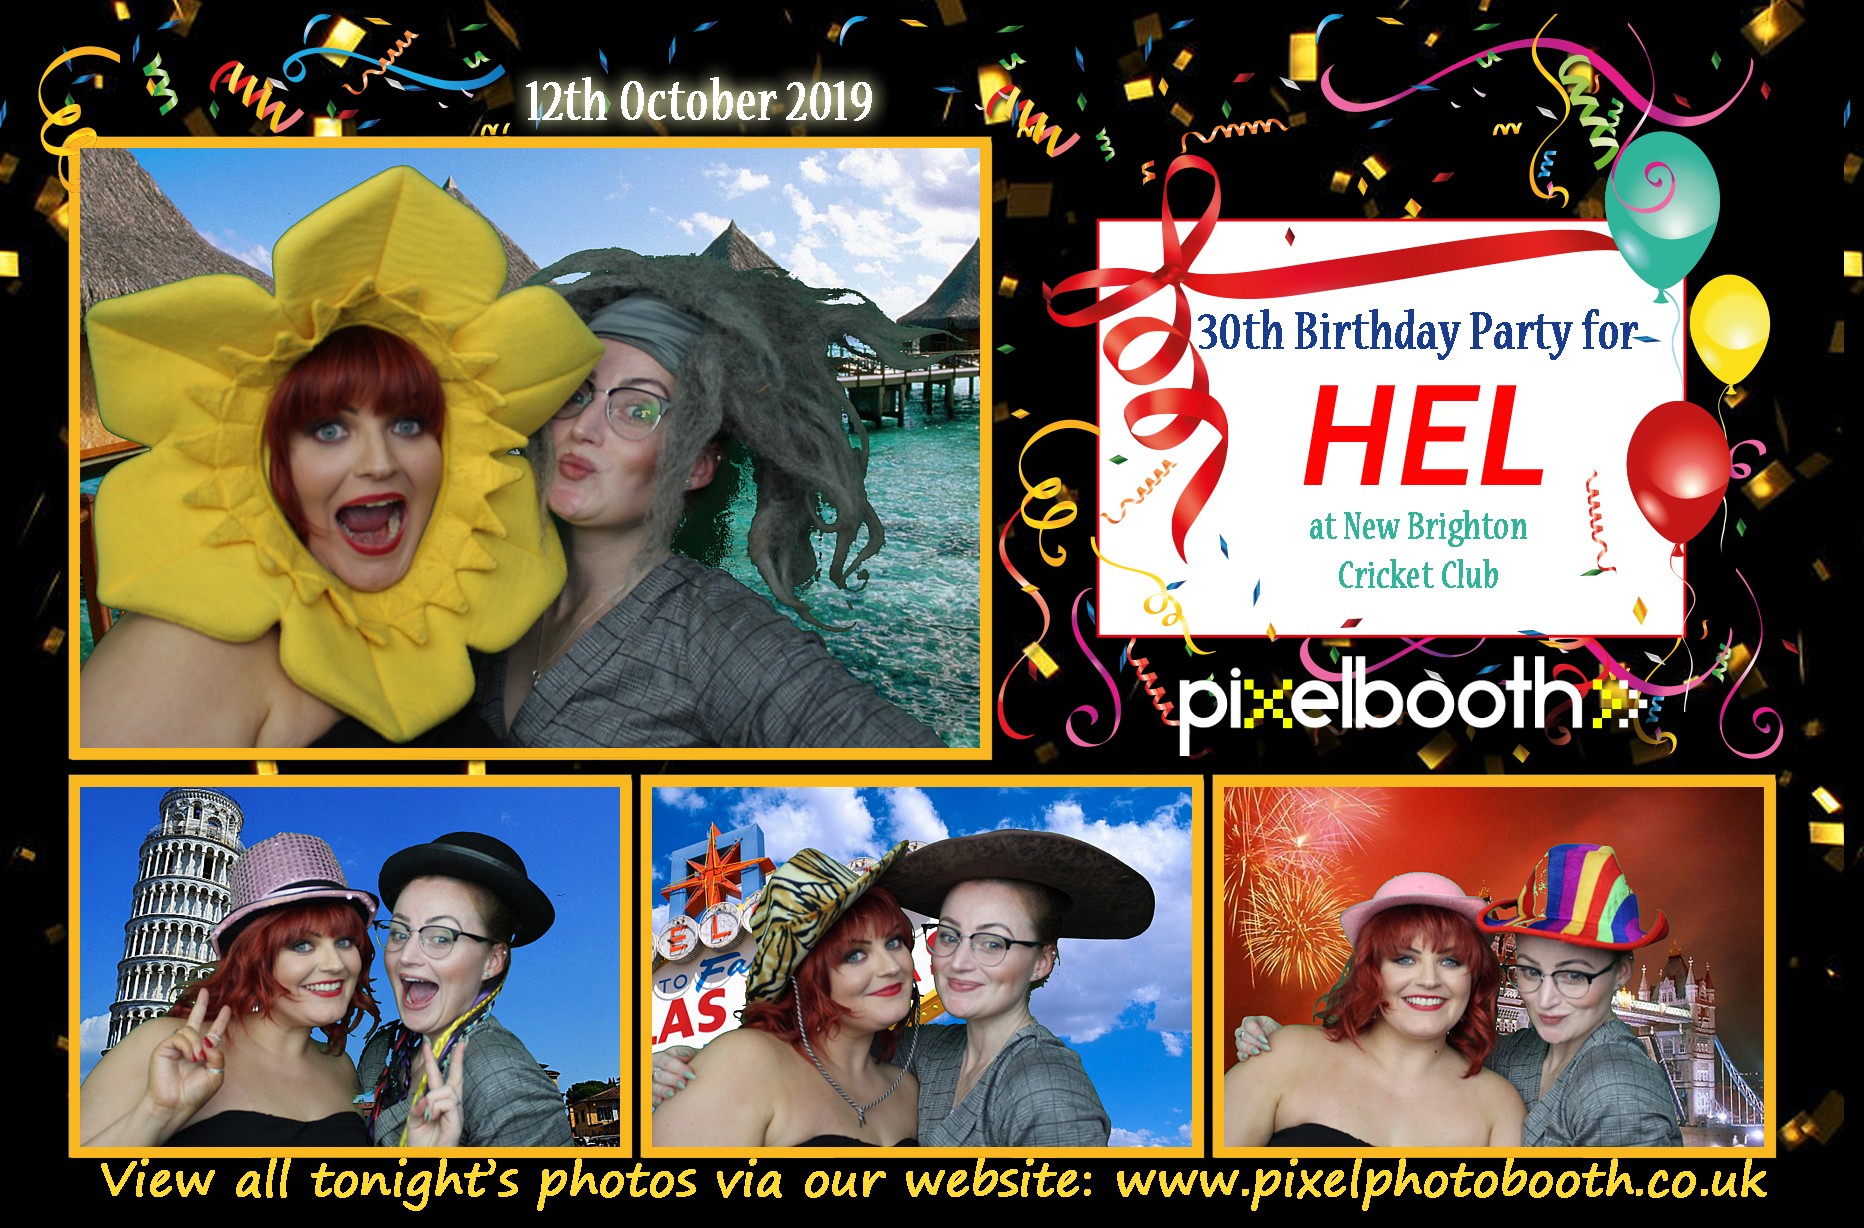 12th Oct 2019: Hel's 30th Birthday Party